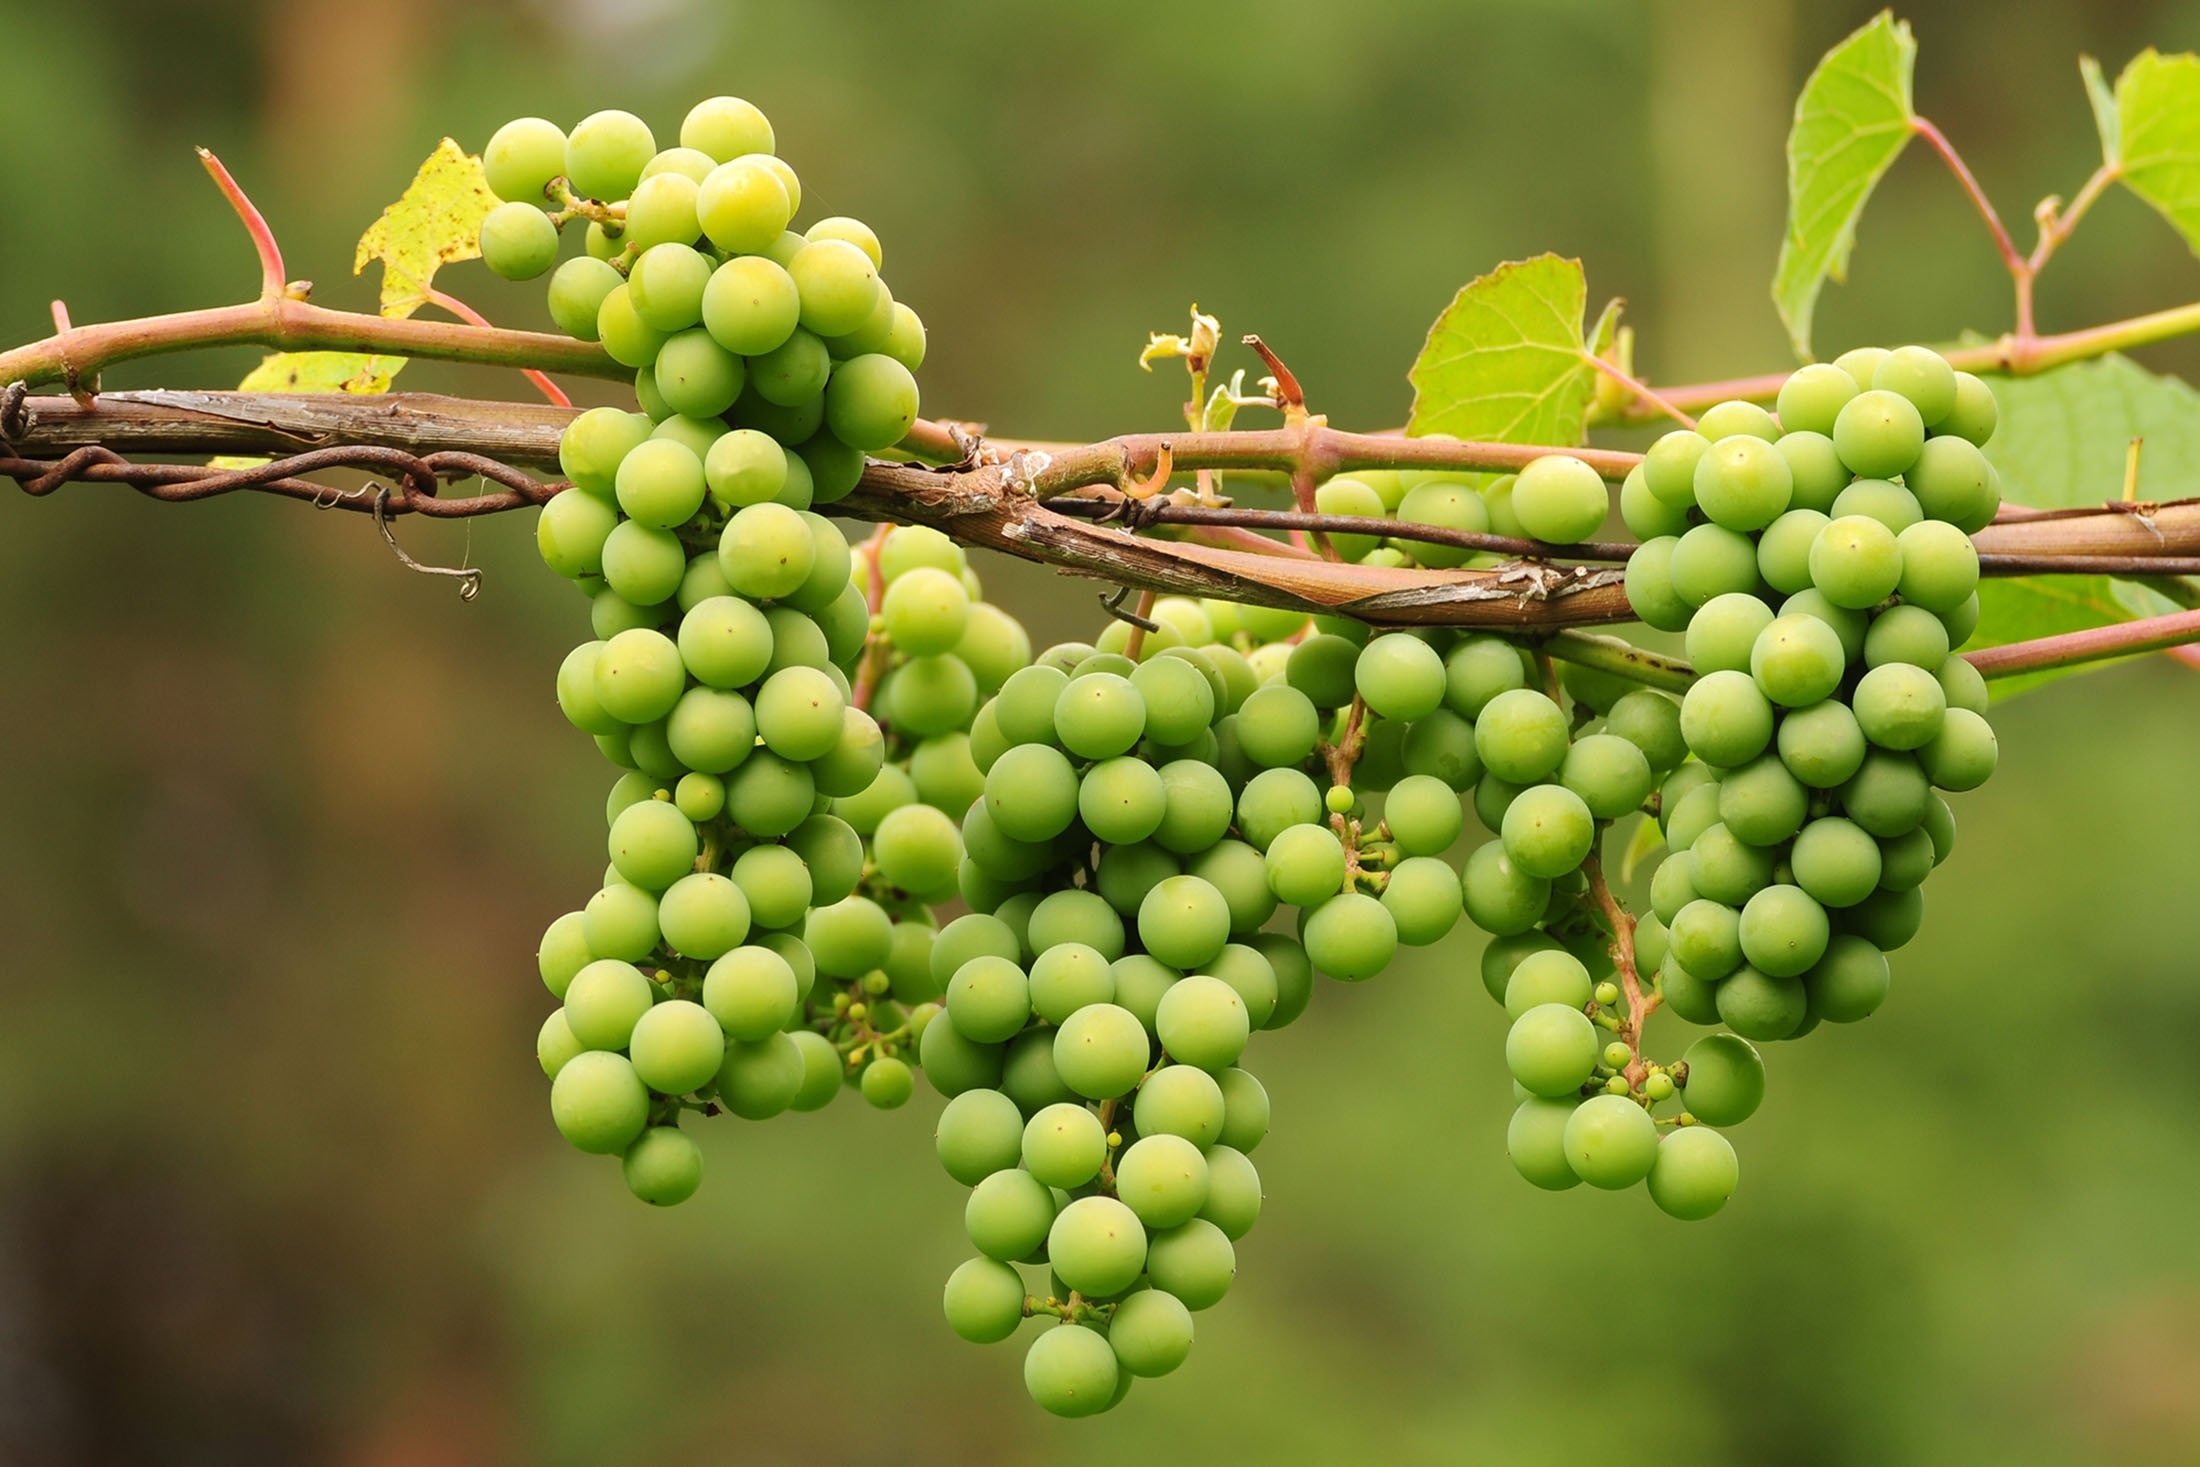 Koruk, or unripe grapes with a sour and tart taste, will help remove harmful toxins that have accumulated in the body.  (Shutterstock photo)